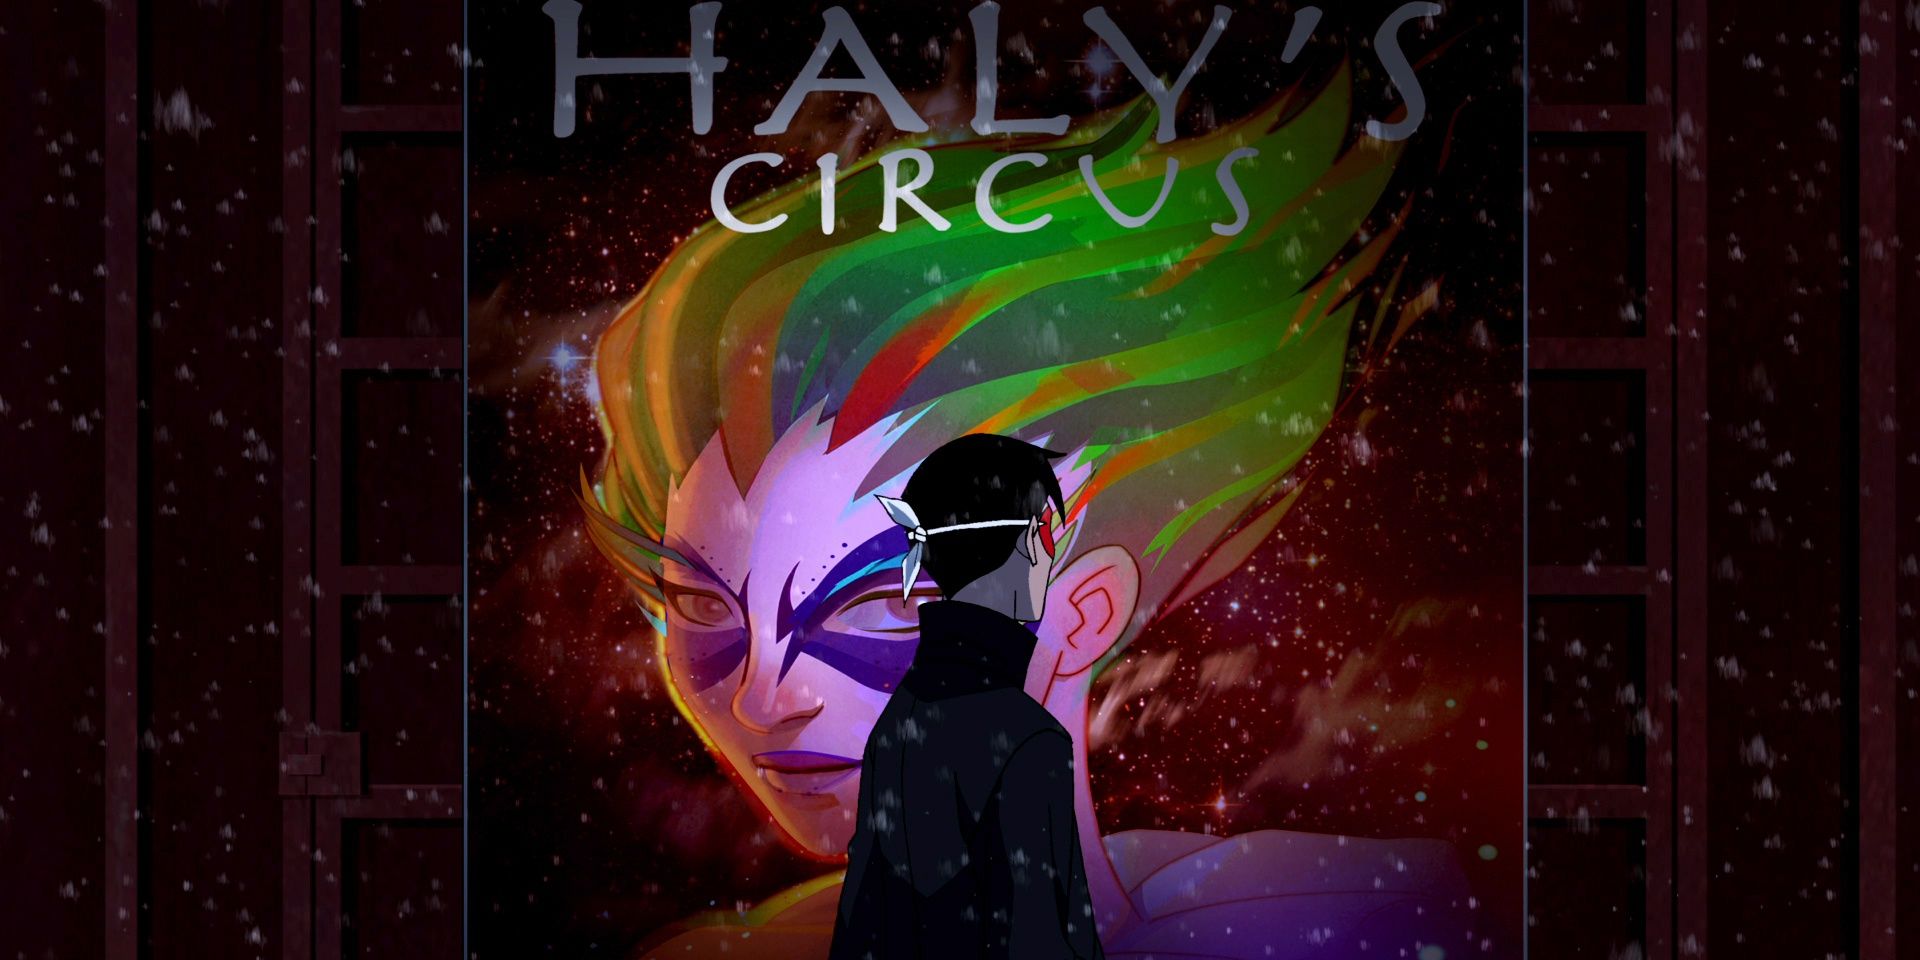 Robin passes Haly's Circus in Young Justice